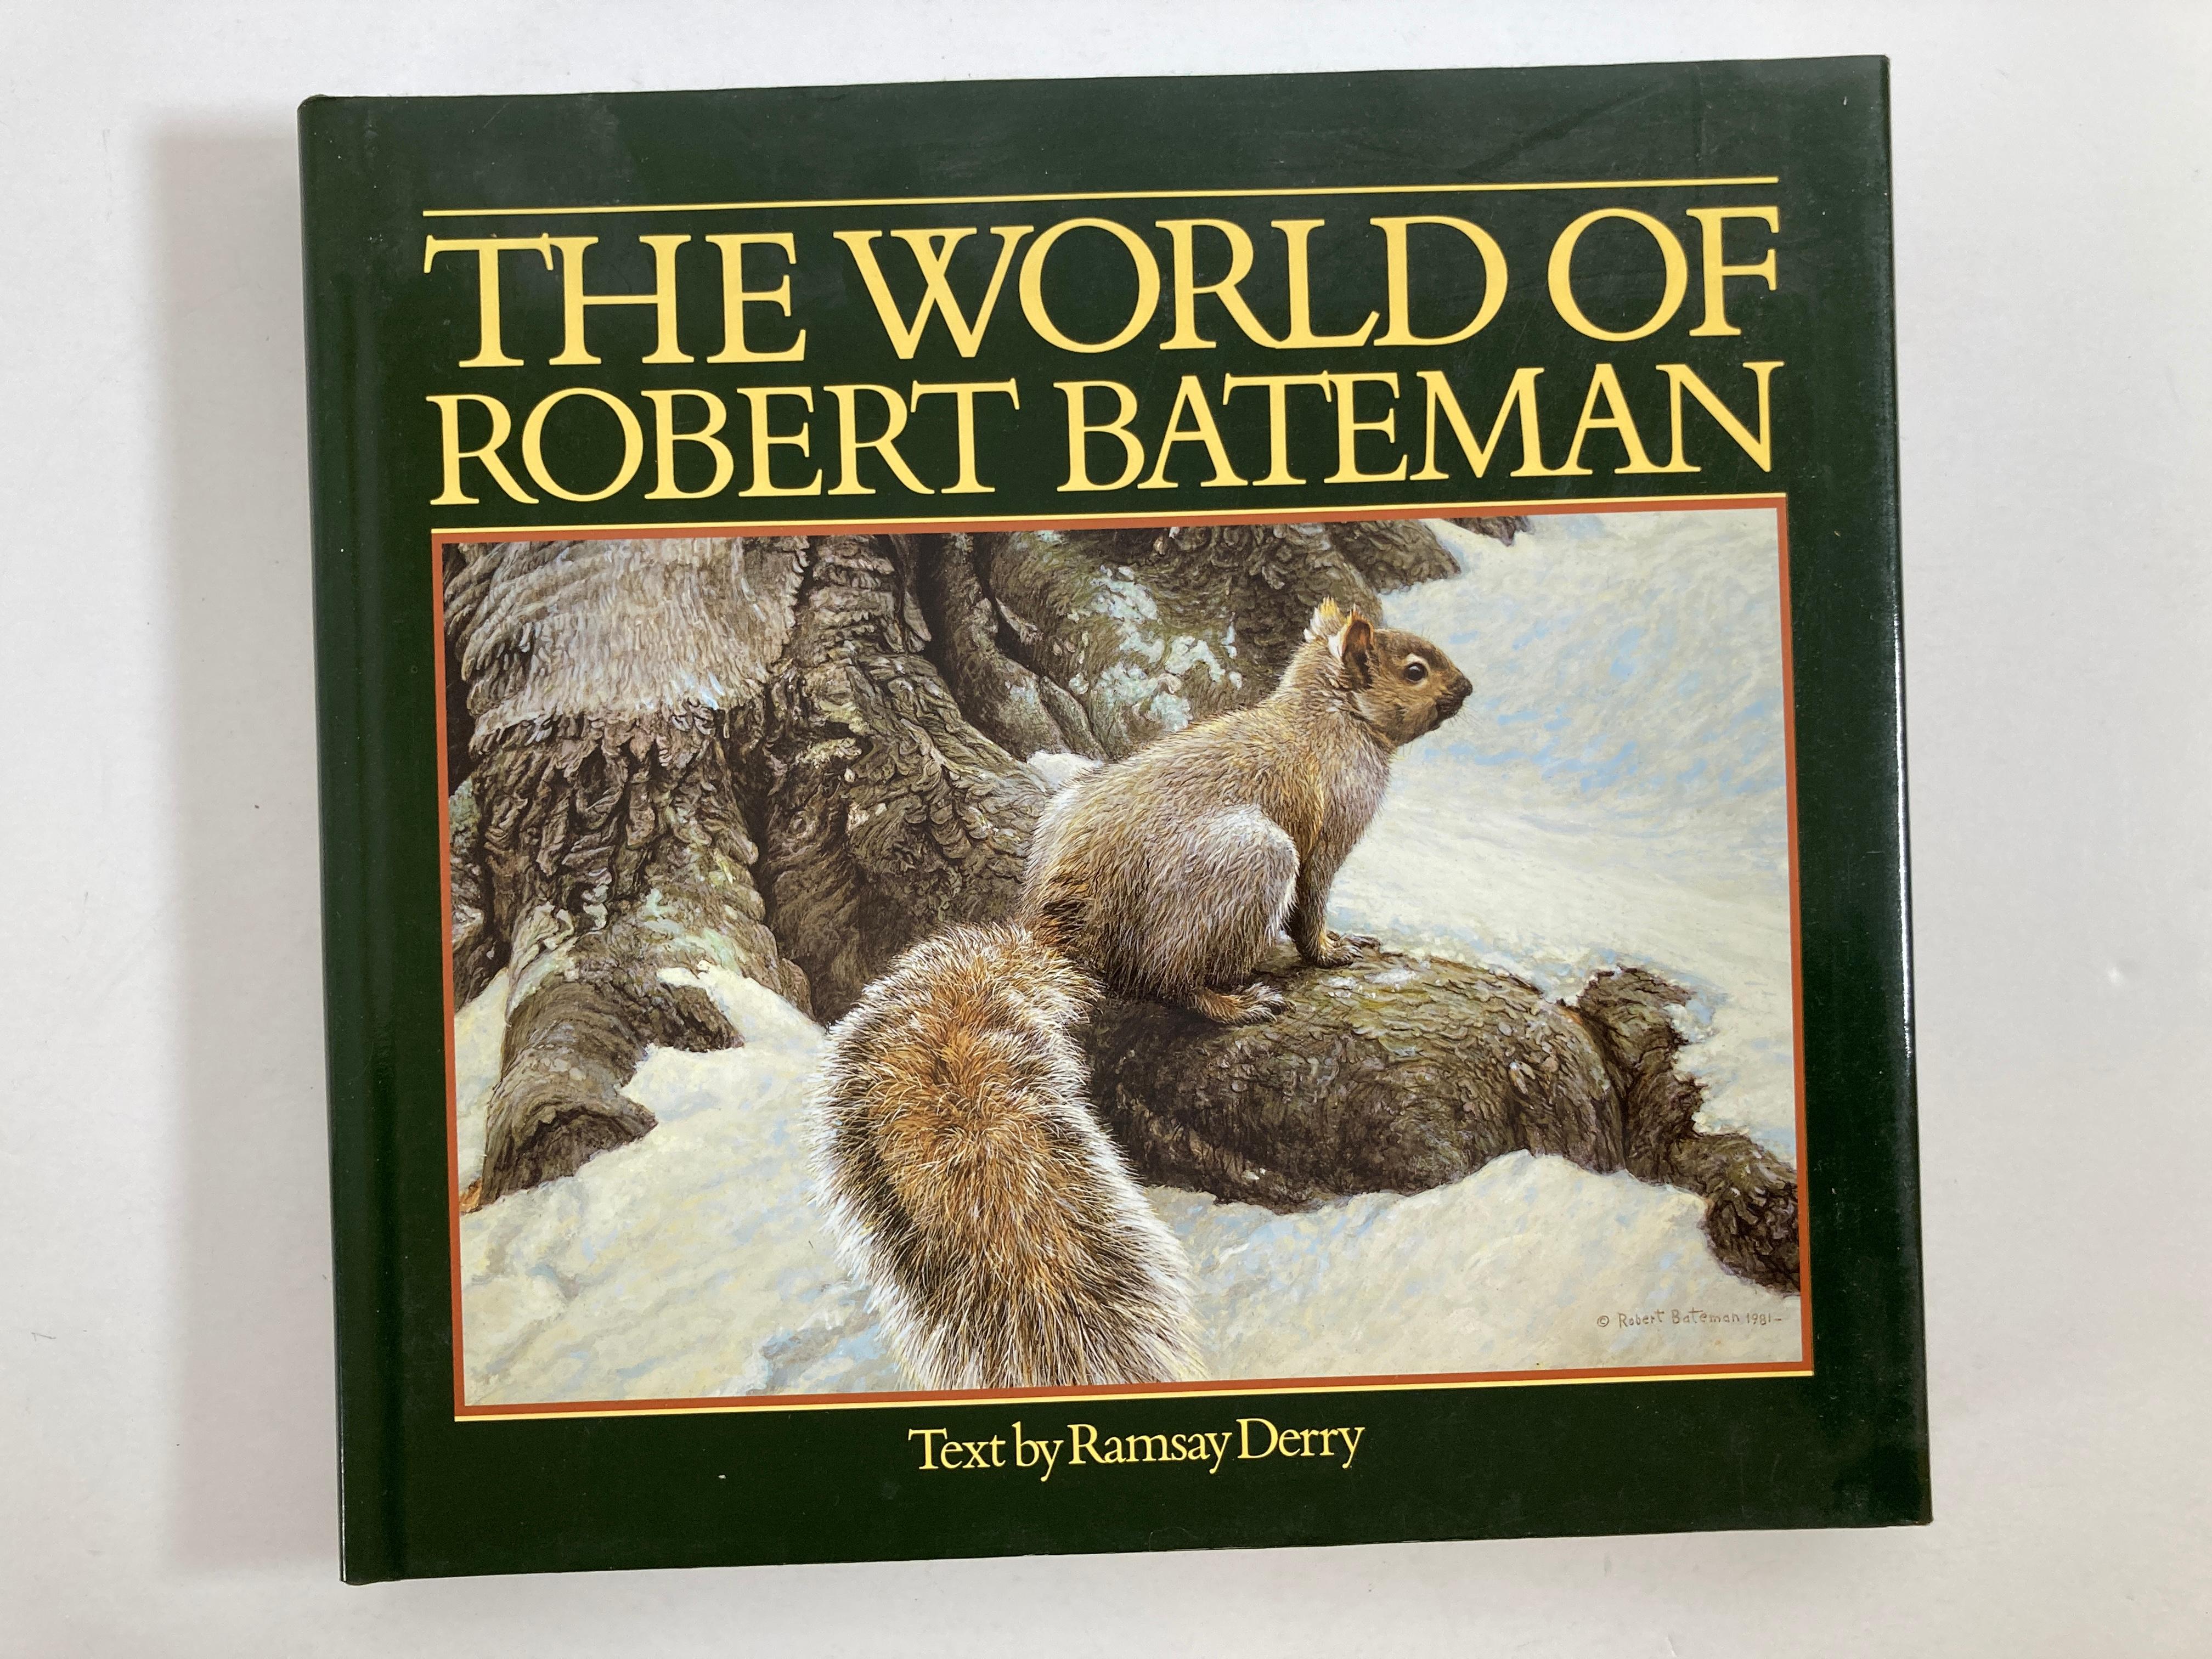 The World of Robert Bateman
by Robert Bateman (Artist), Ramsay Derry, V. John Lee (Design).
Showcasing his message of environmental protection, this testament to Robert Bateman’s important work as an artist and conservationist features early